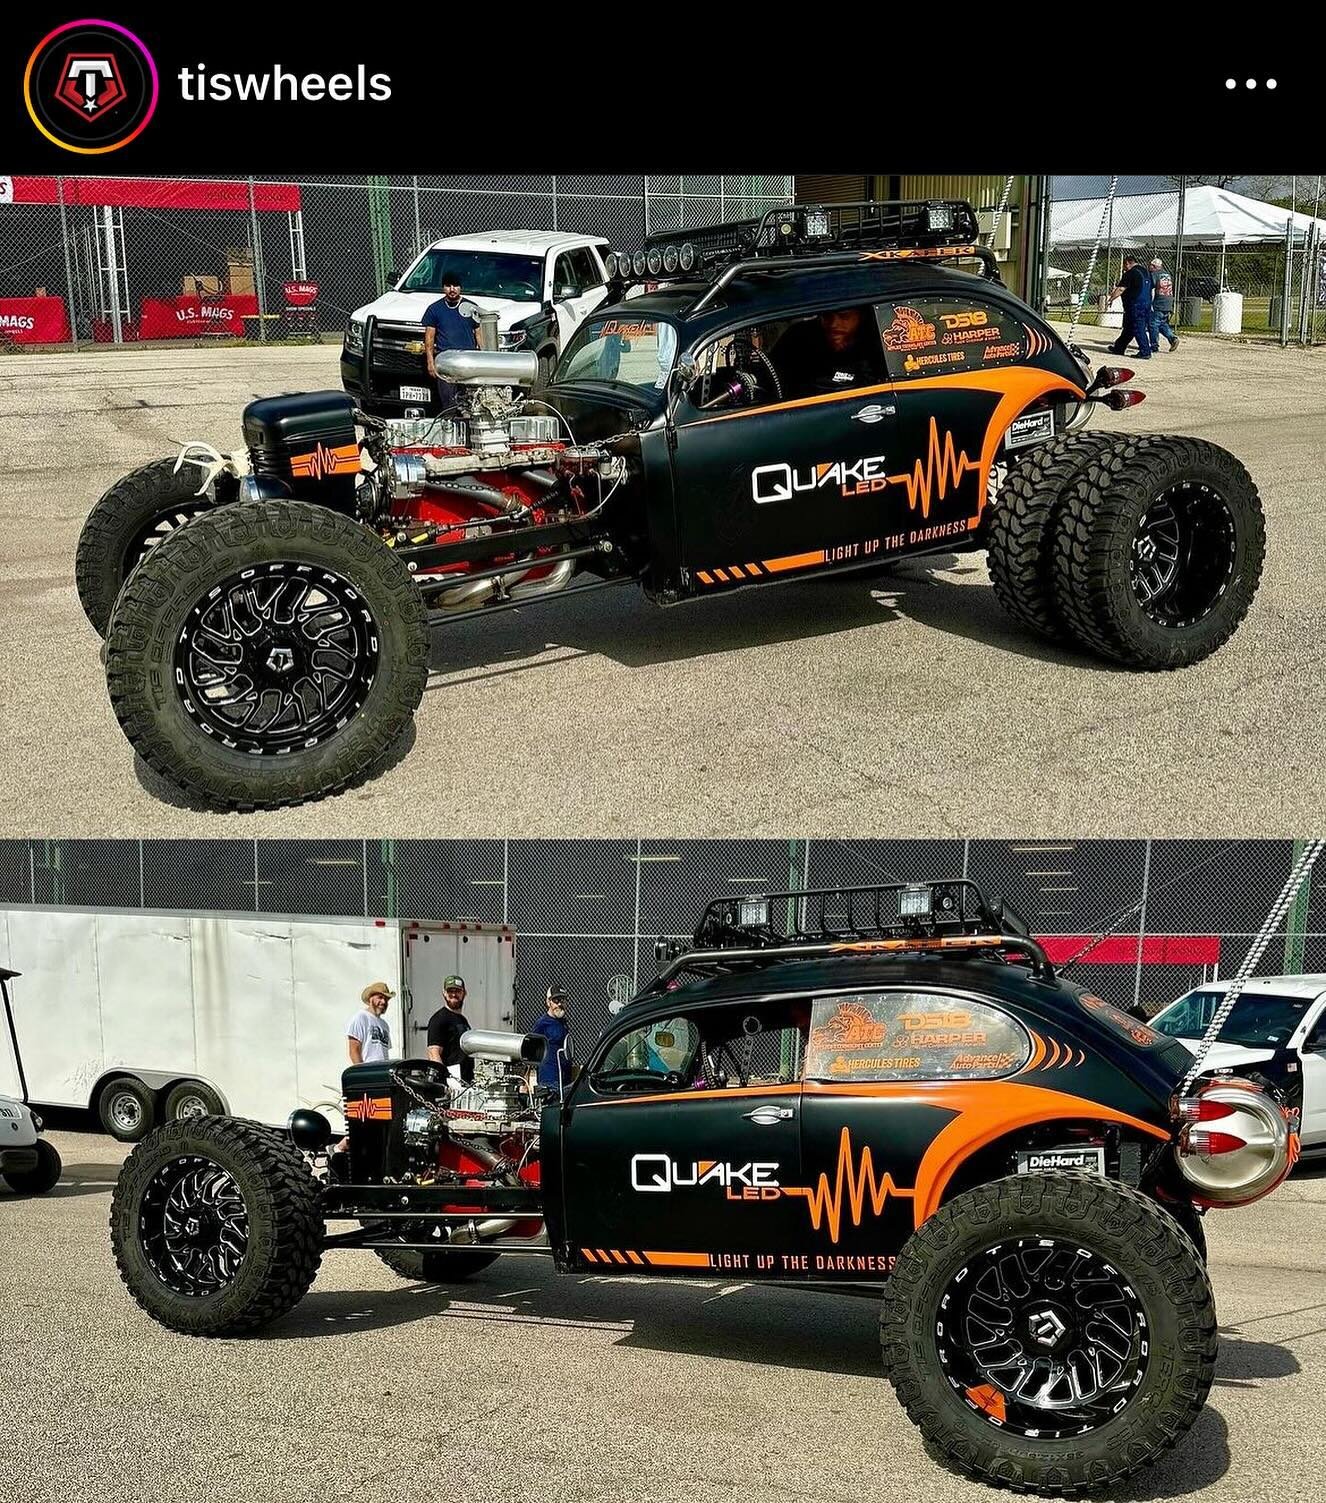 Come see Freak-N-Stein at the @lonestarthrowdown this weekend. Repost from @tiswheels @freak_show_builds @quakeled @atcrockhillsc @herculestires @ds18audio @advanceautoparts @valkdesignsolutions @outcastcustom @harpercorp @rockhillschools @therealmar